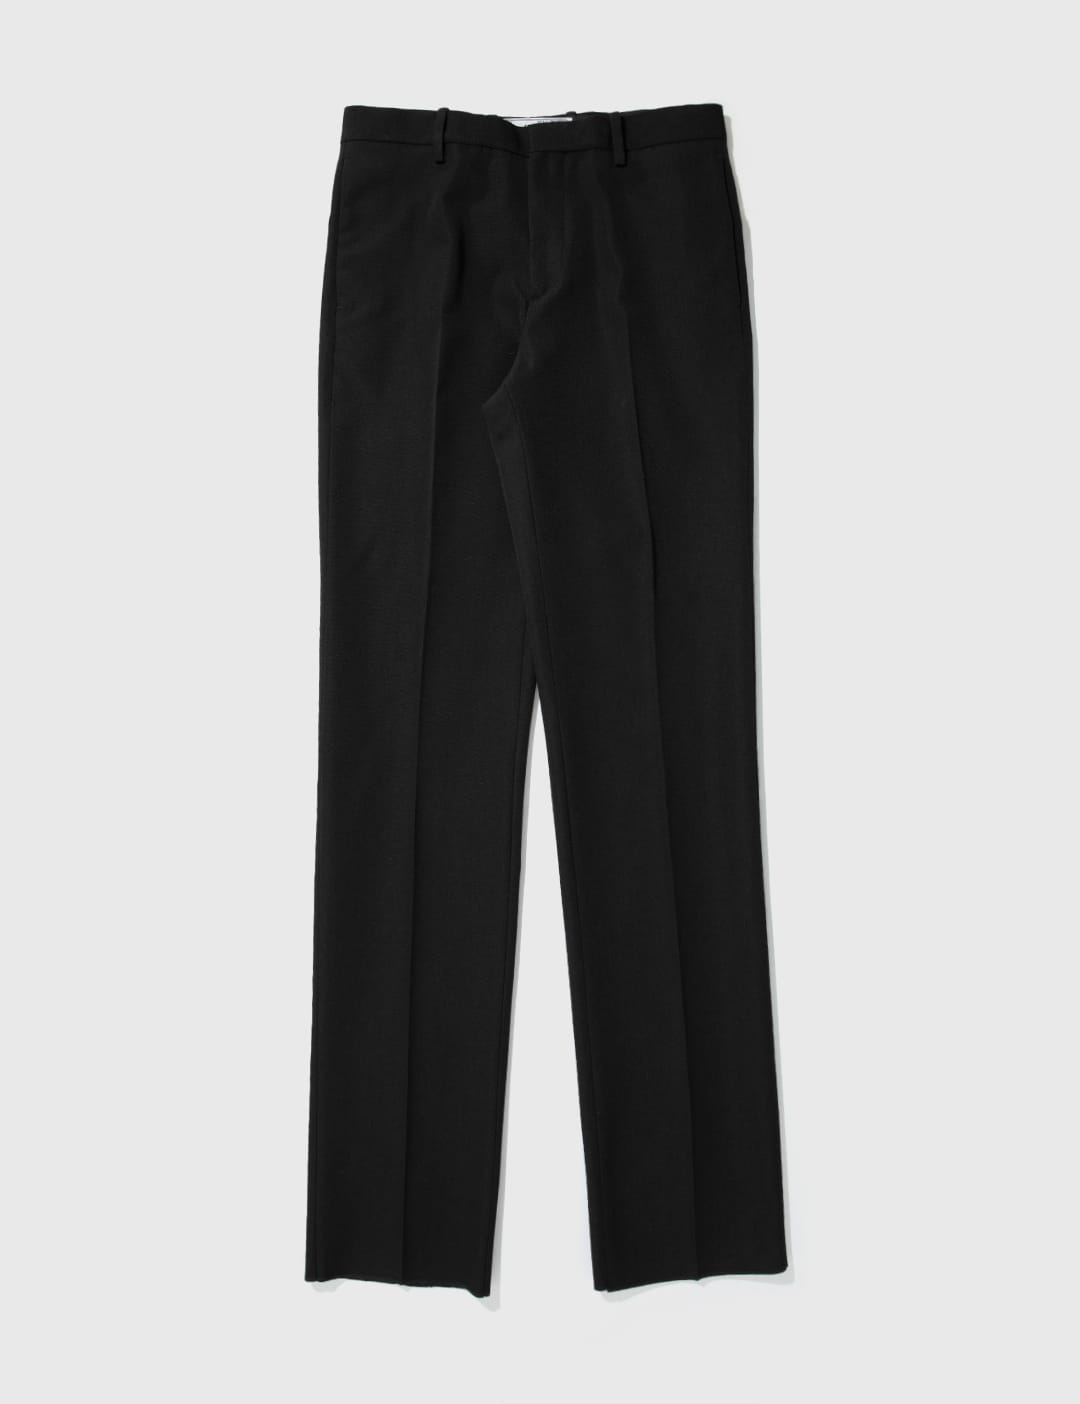 Mens Vintage Wool Suit Pants Slim Fit Solid Color Formal Formal Trousers  For Men For Business Casual Wear England Style Pantalon Homme Classique  From Pulchritude, $32.55 | DHgate.Com